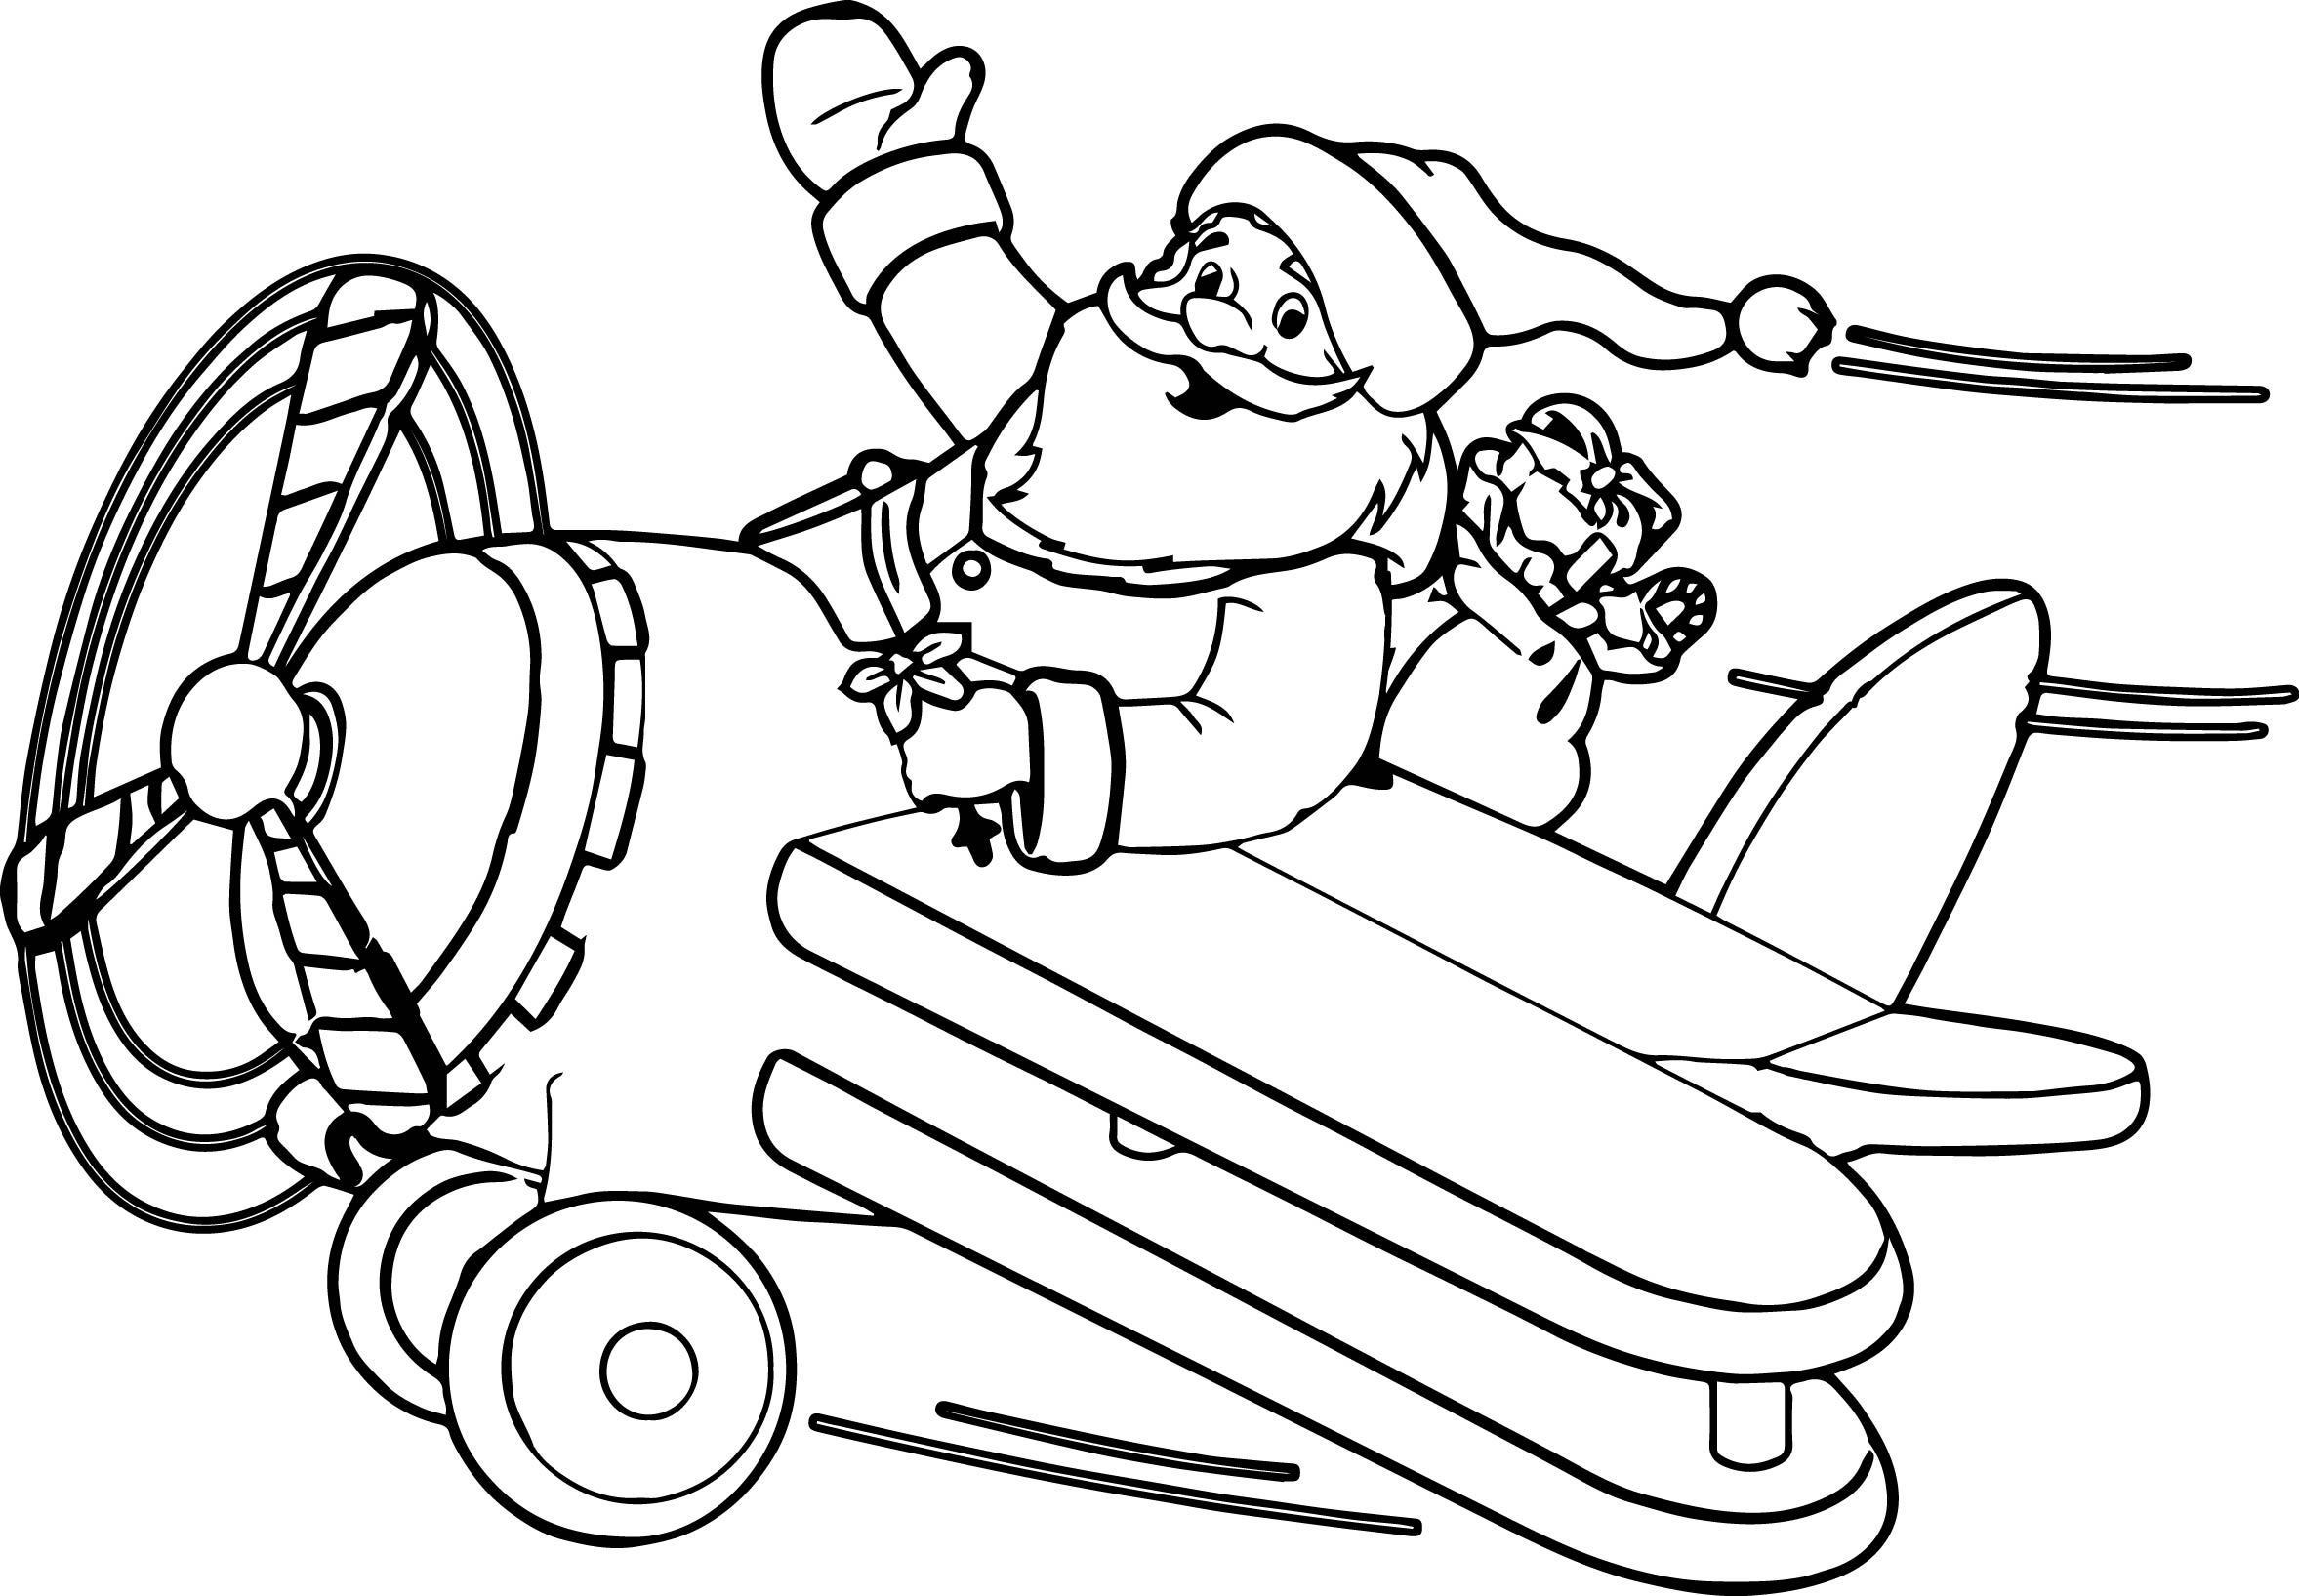 airplane cartoon coloring page